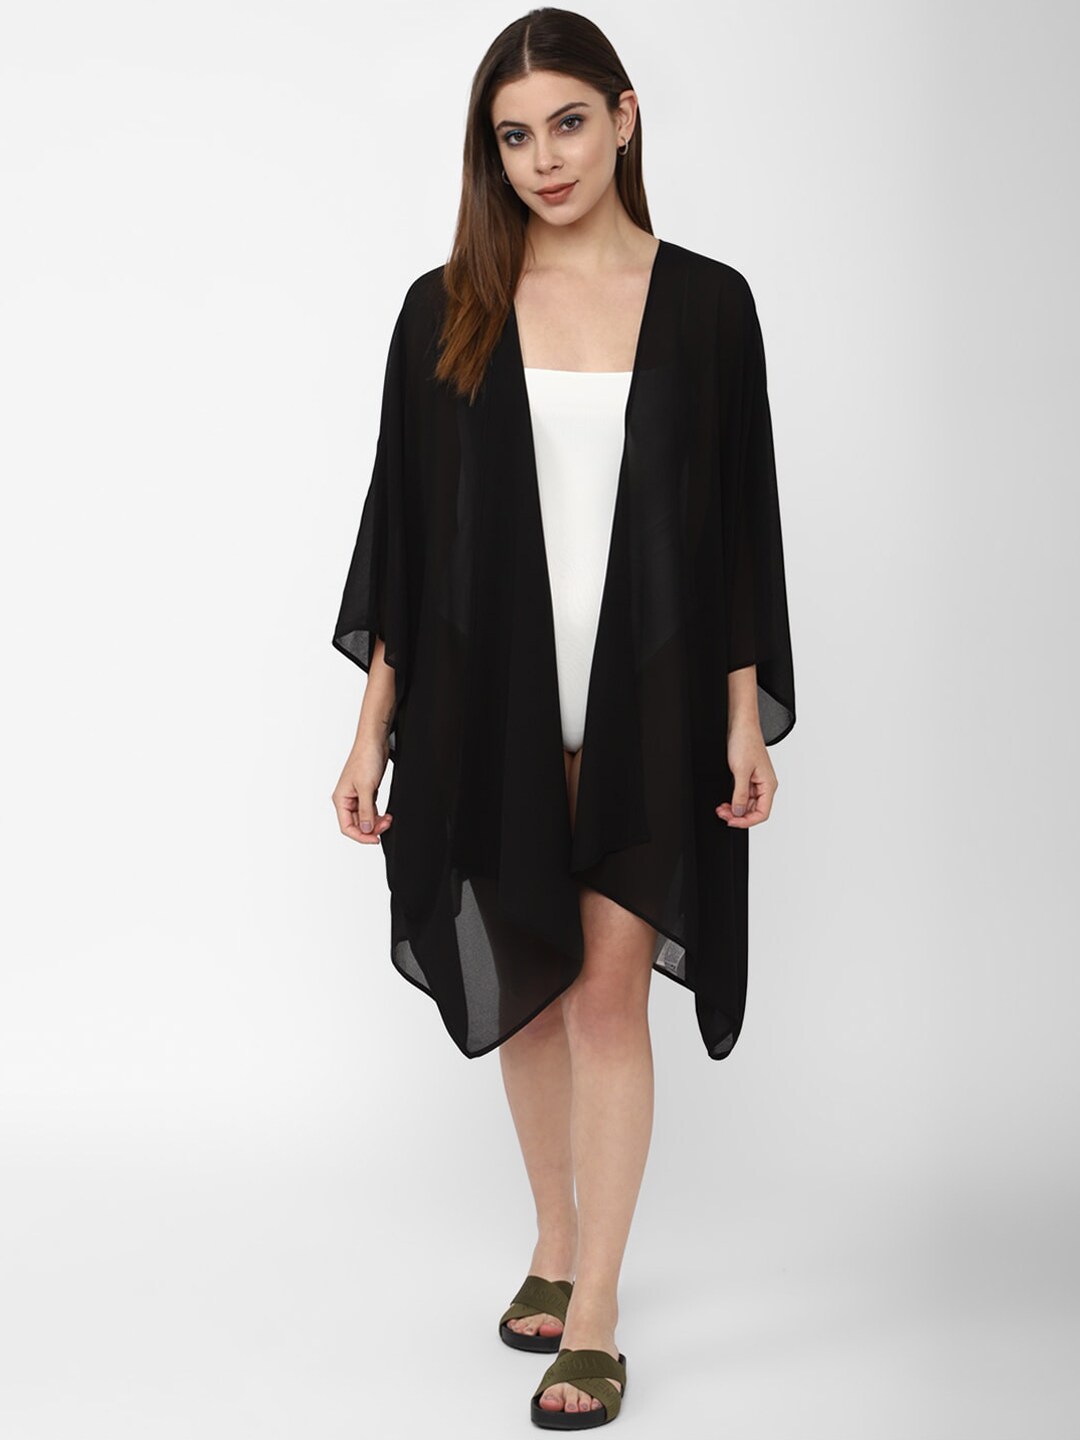 FOREVER 21 Women Black Solid Cover Up Swimwear Price in India